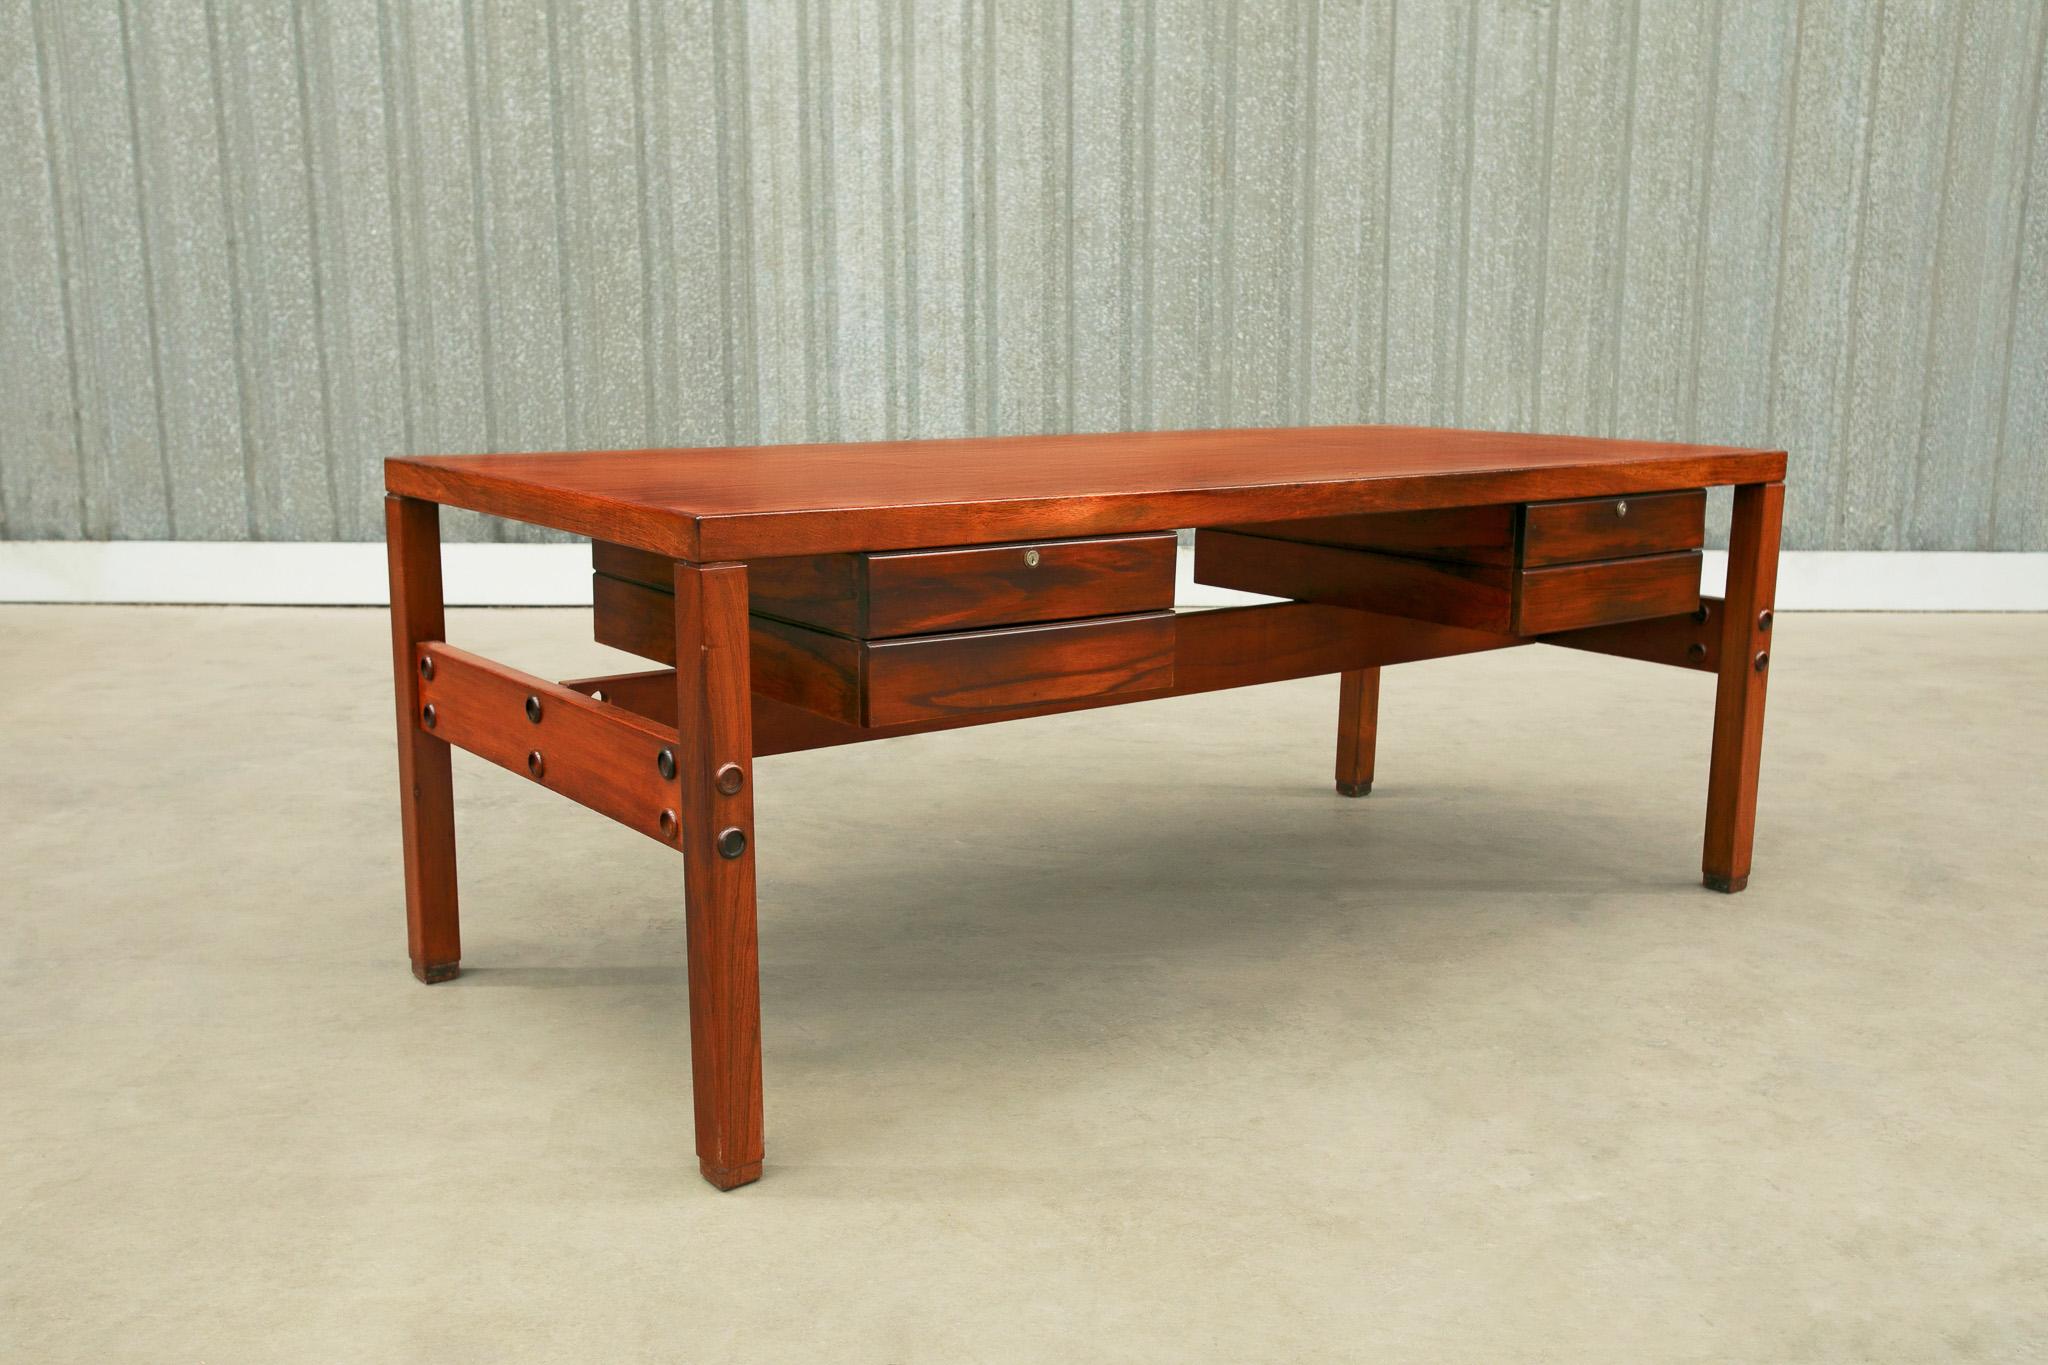 Mid-Century Modern Brazilian Modern Desk in Hardwood with Floating Drawers, Sergio Rodrigues, 1960s For Sale